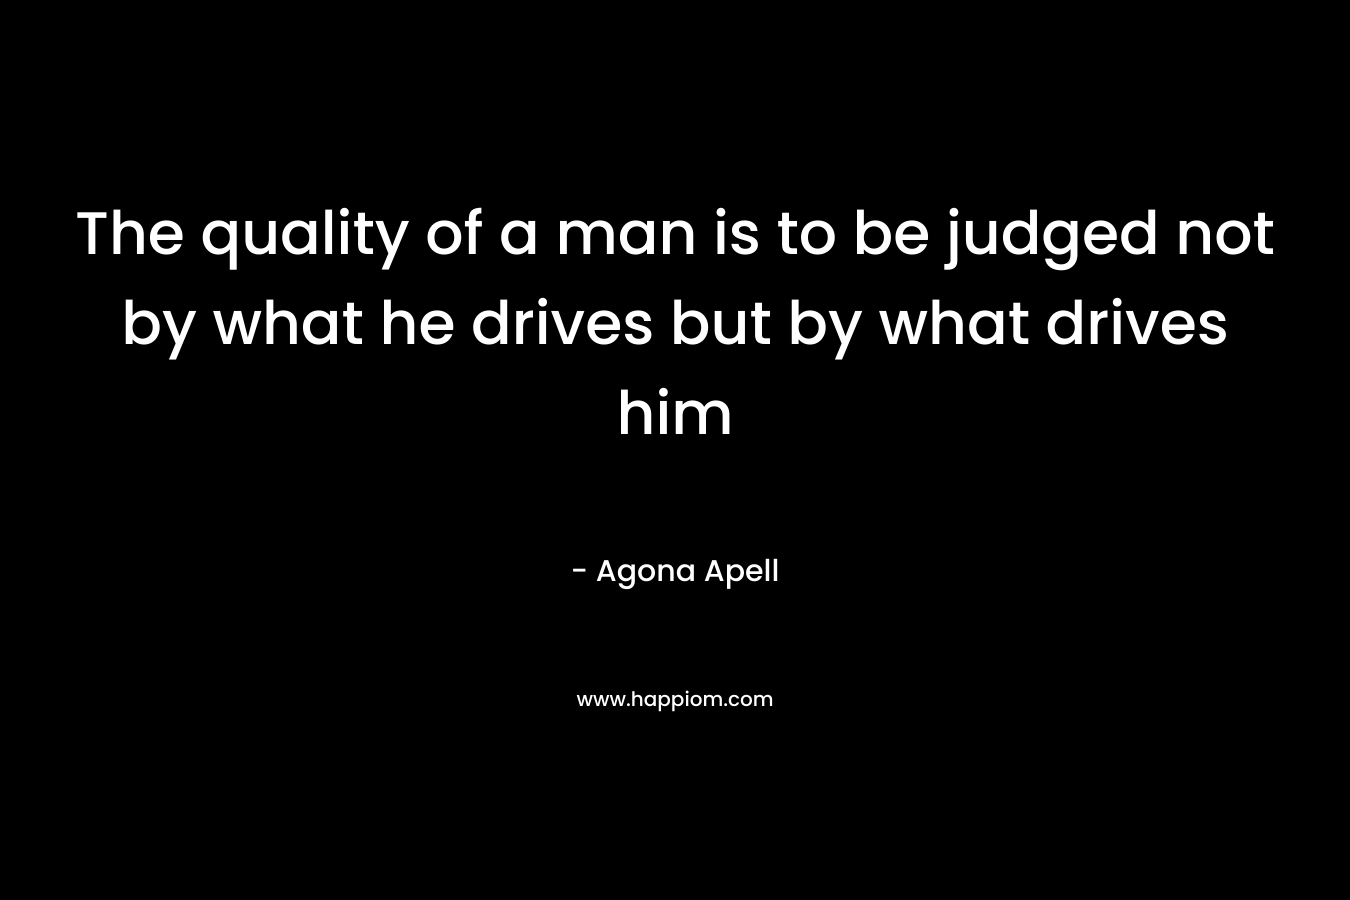 The quality of a man is to be judged not by what he drives but by what drives him